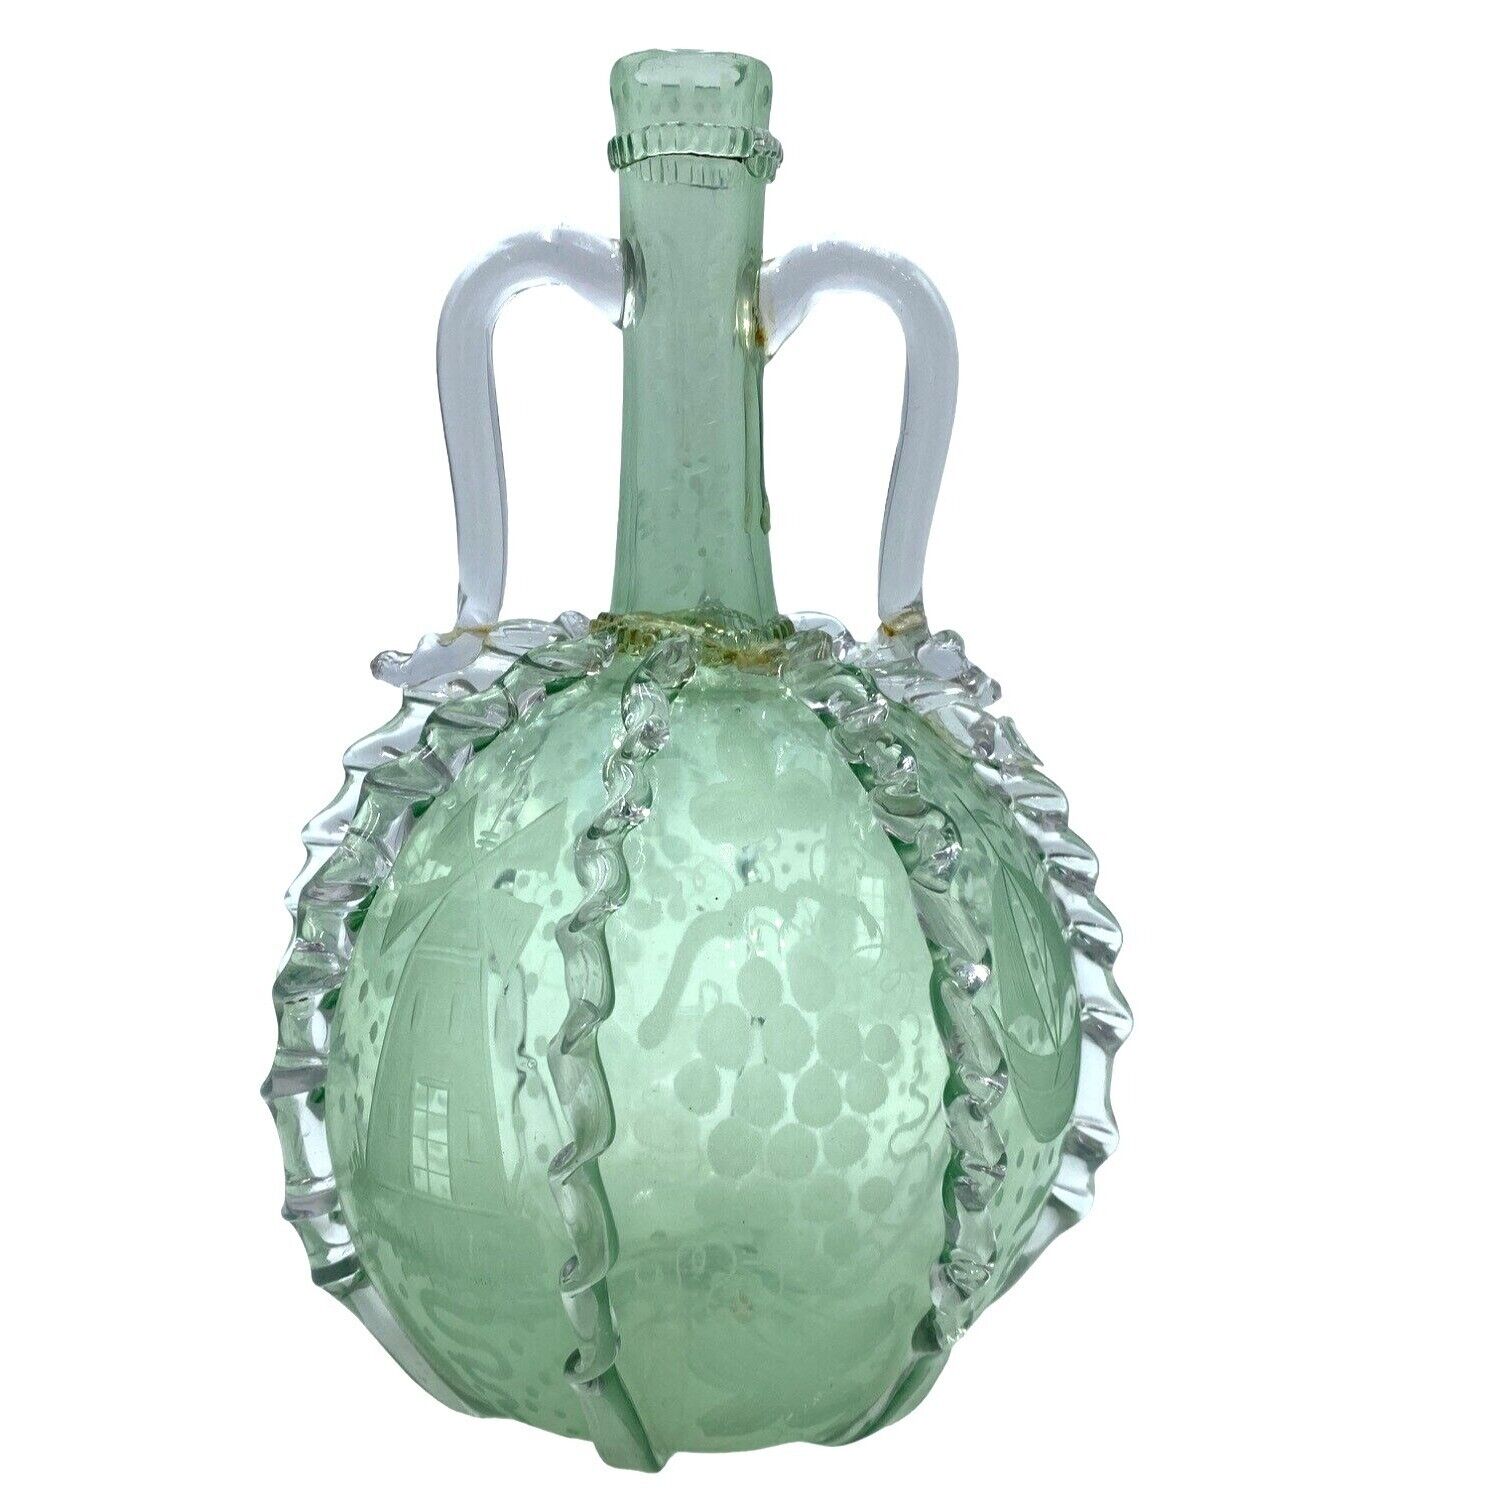 Glass Decanter Double Handle Rippling Decoration Etched Hand-Blown Artisan Vinta